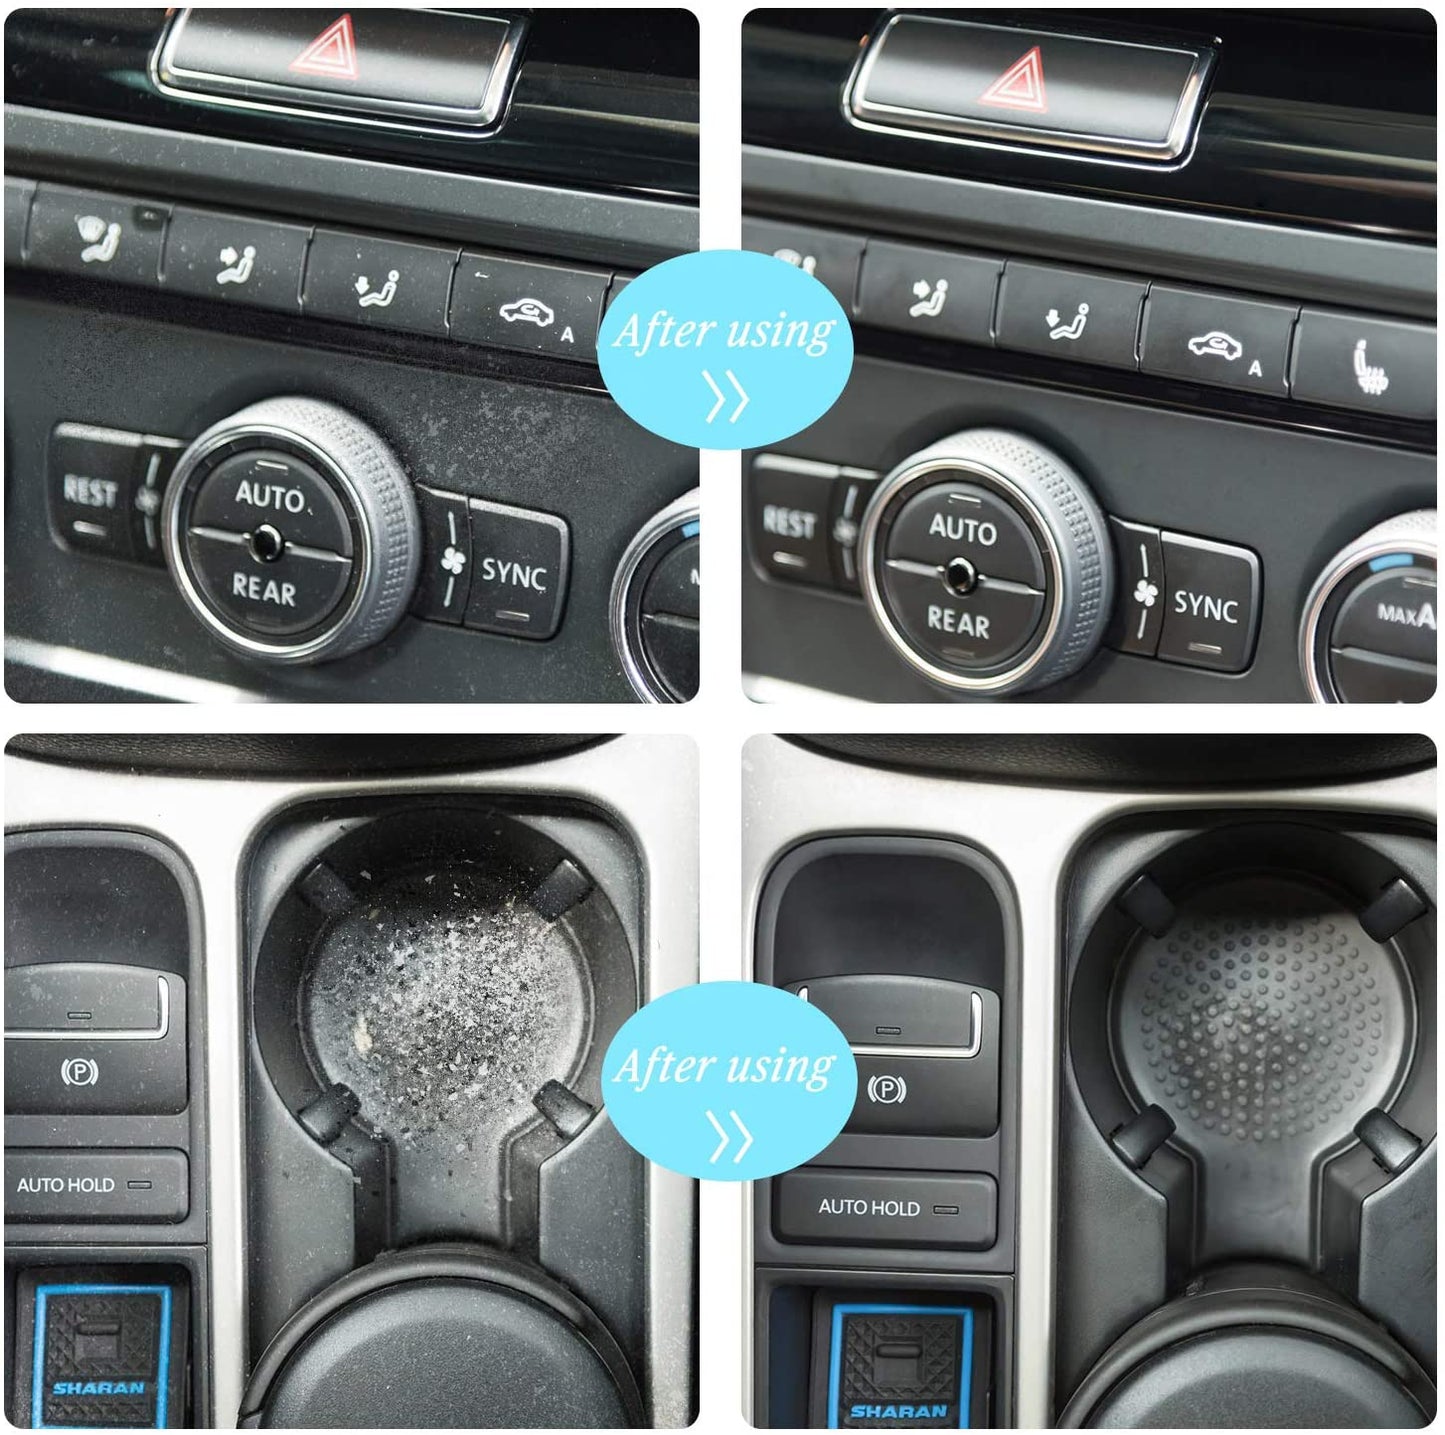 Car Keyboard Cleaner Automotive Dust Vent Interior Detail Removal